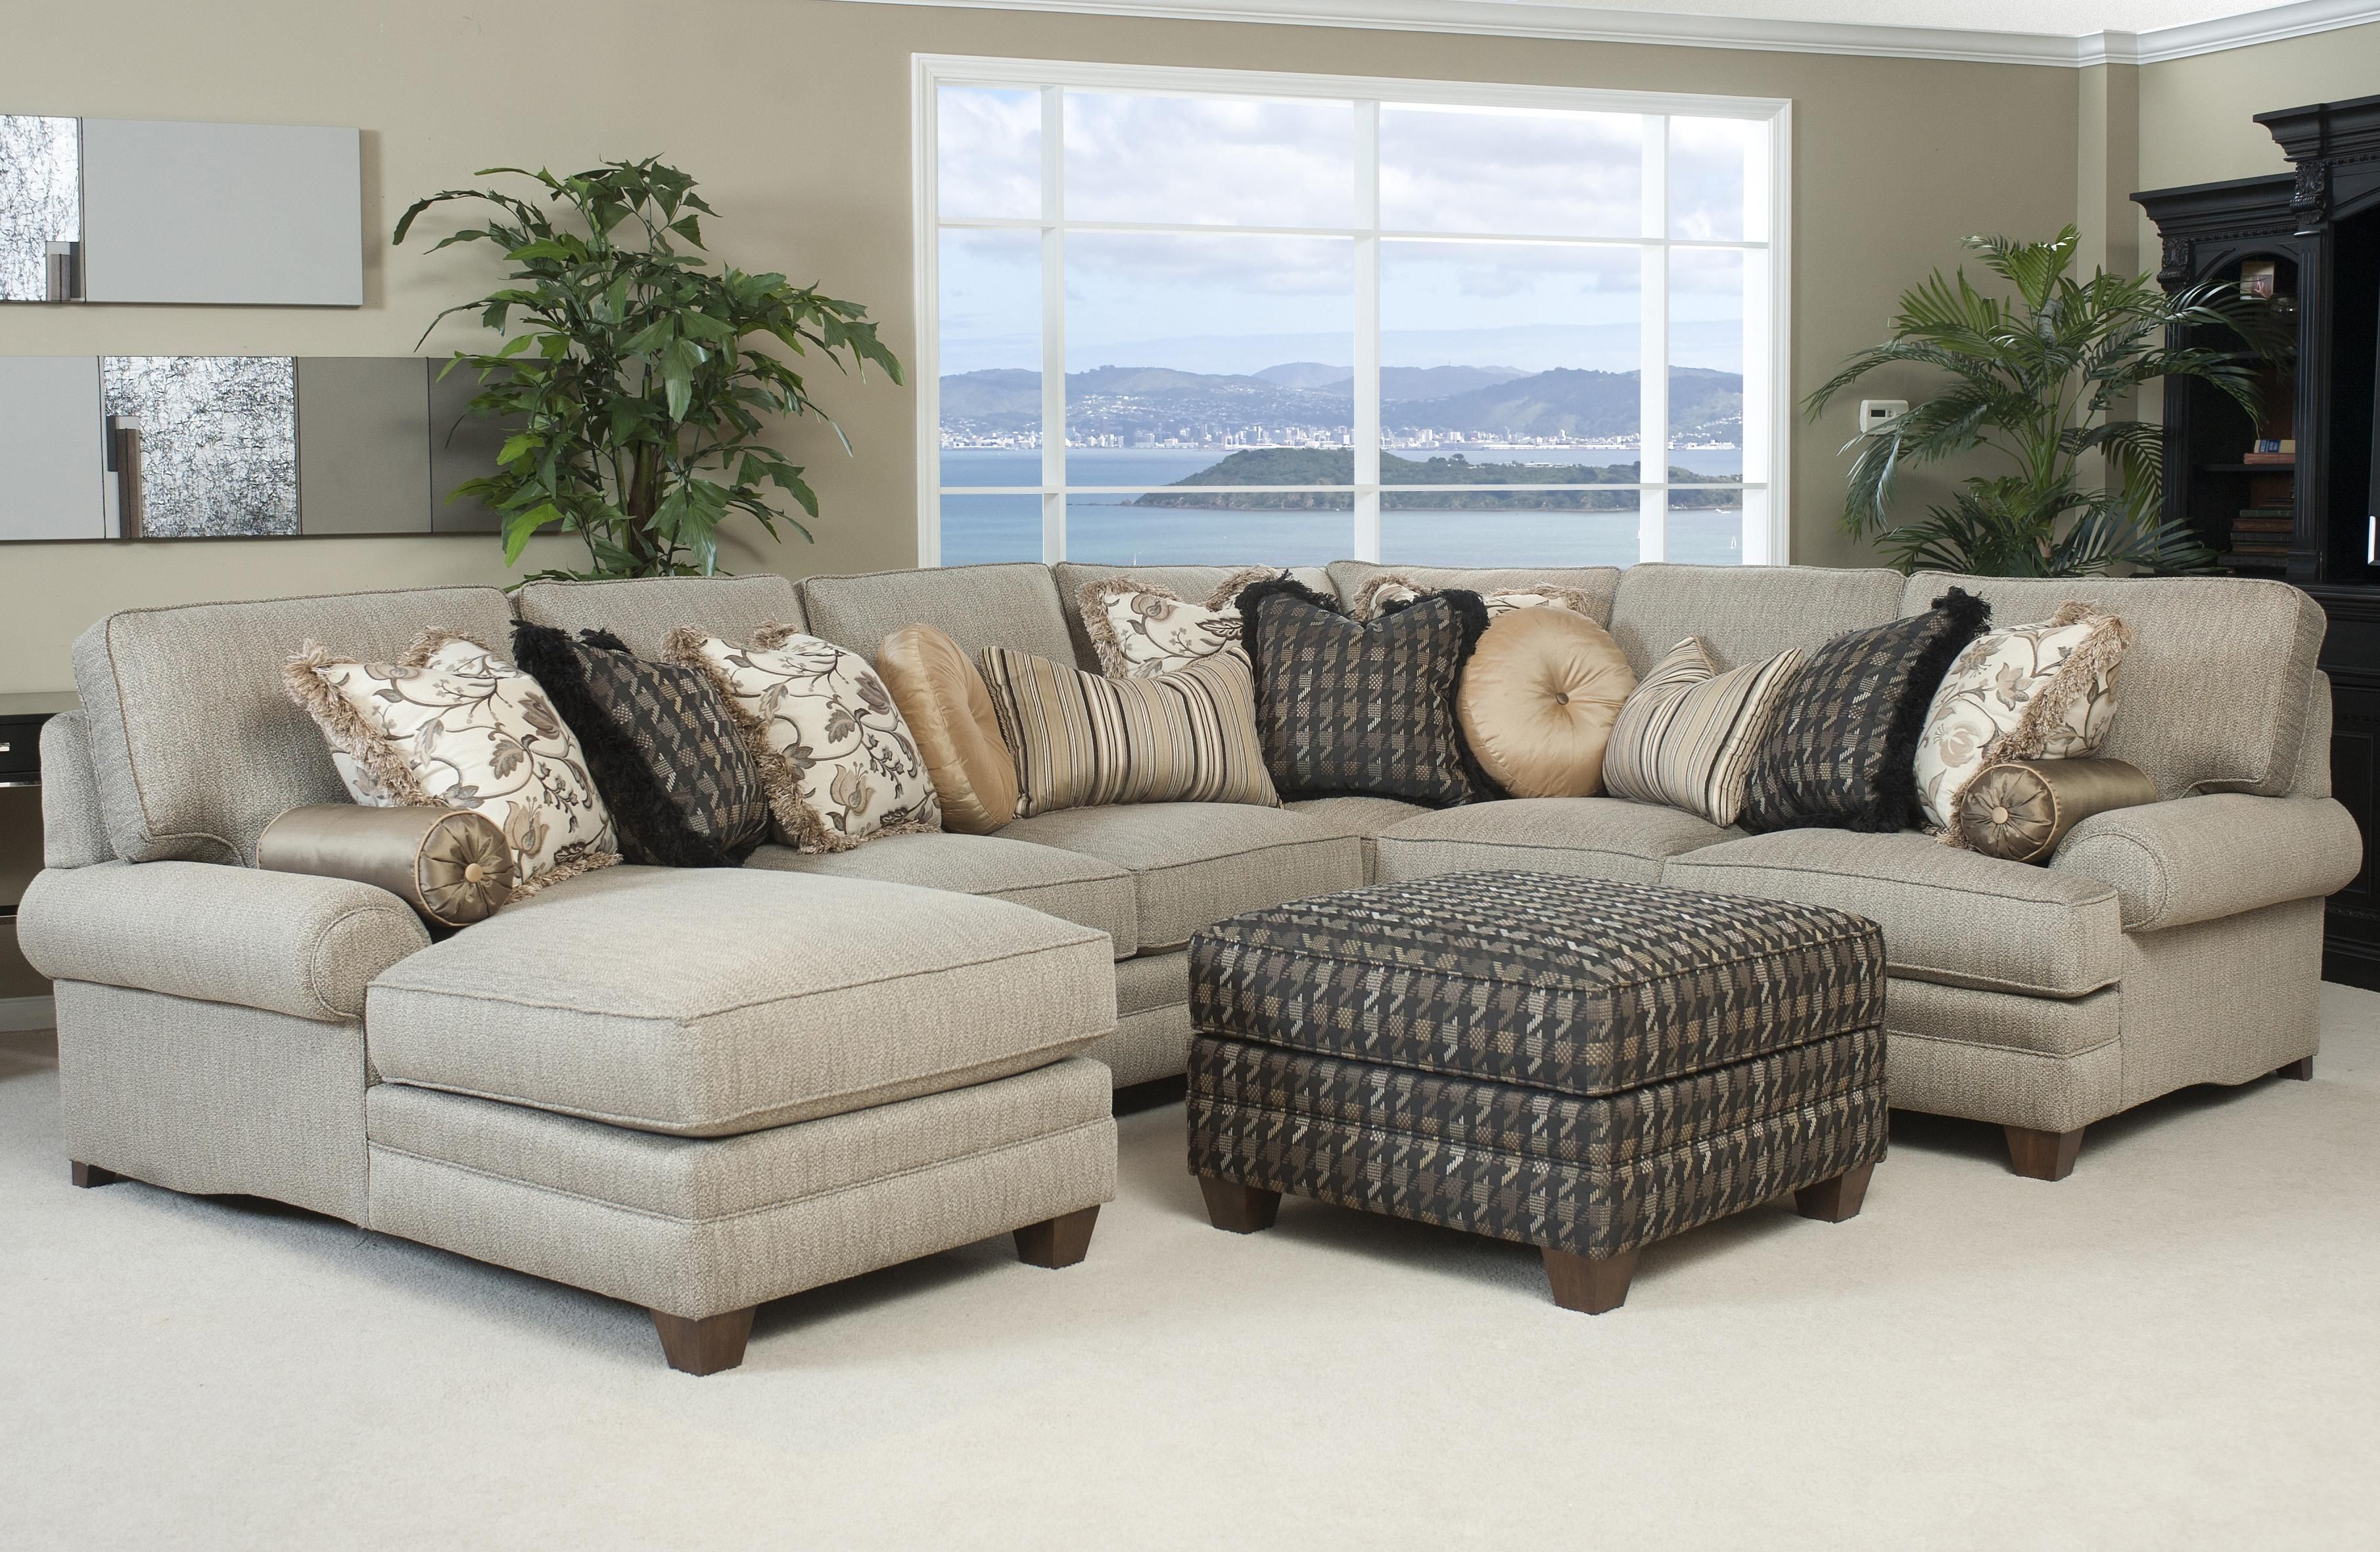 Most Comfortable Leather Sectional Sofa • Leather Sofa Within Comfortable Sectional Sofas (View 3 of 10)